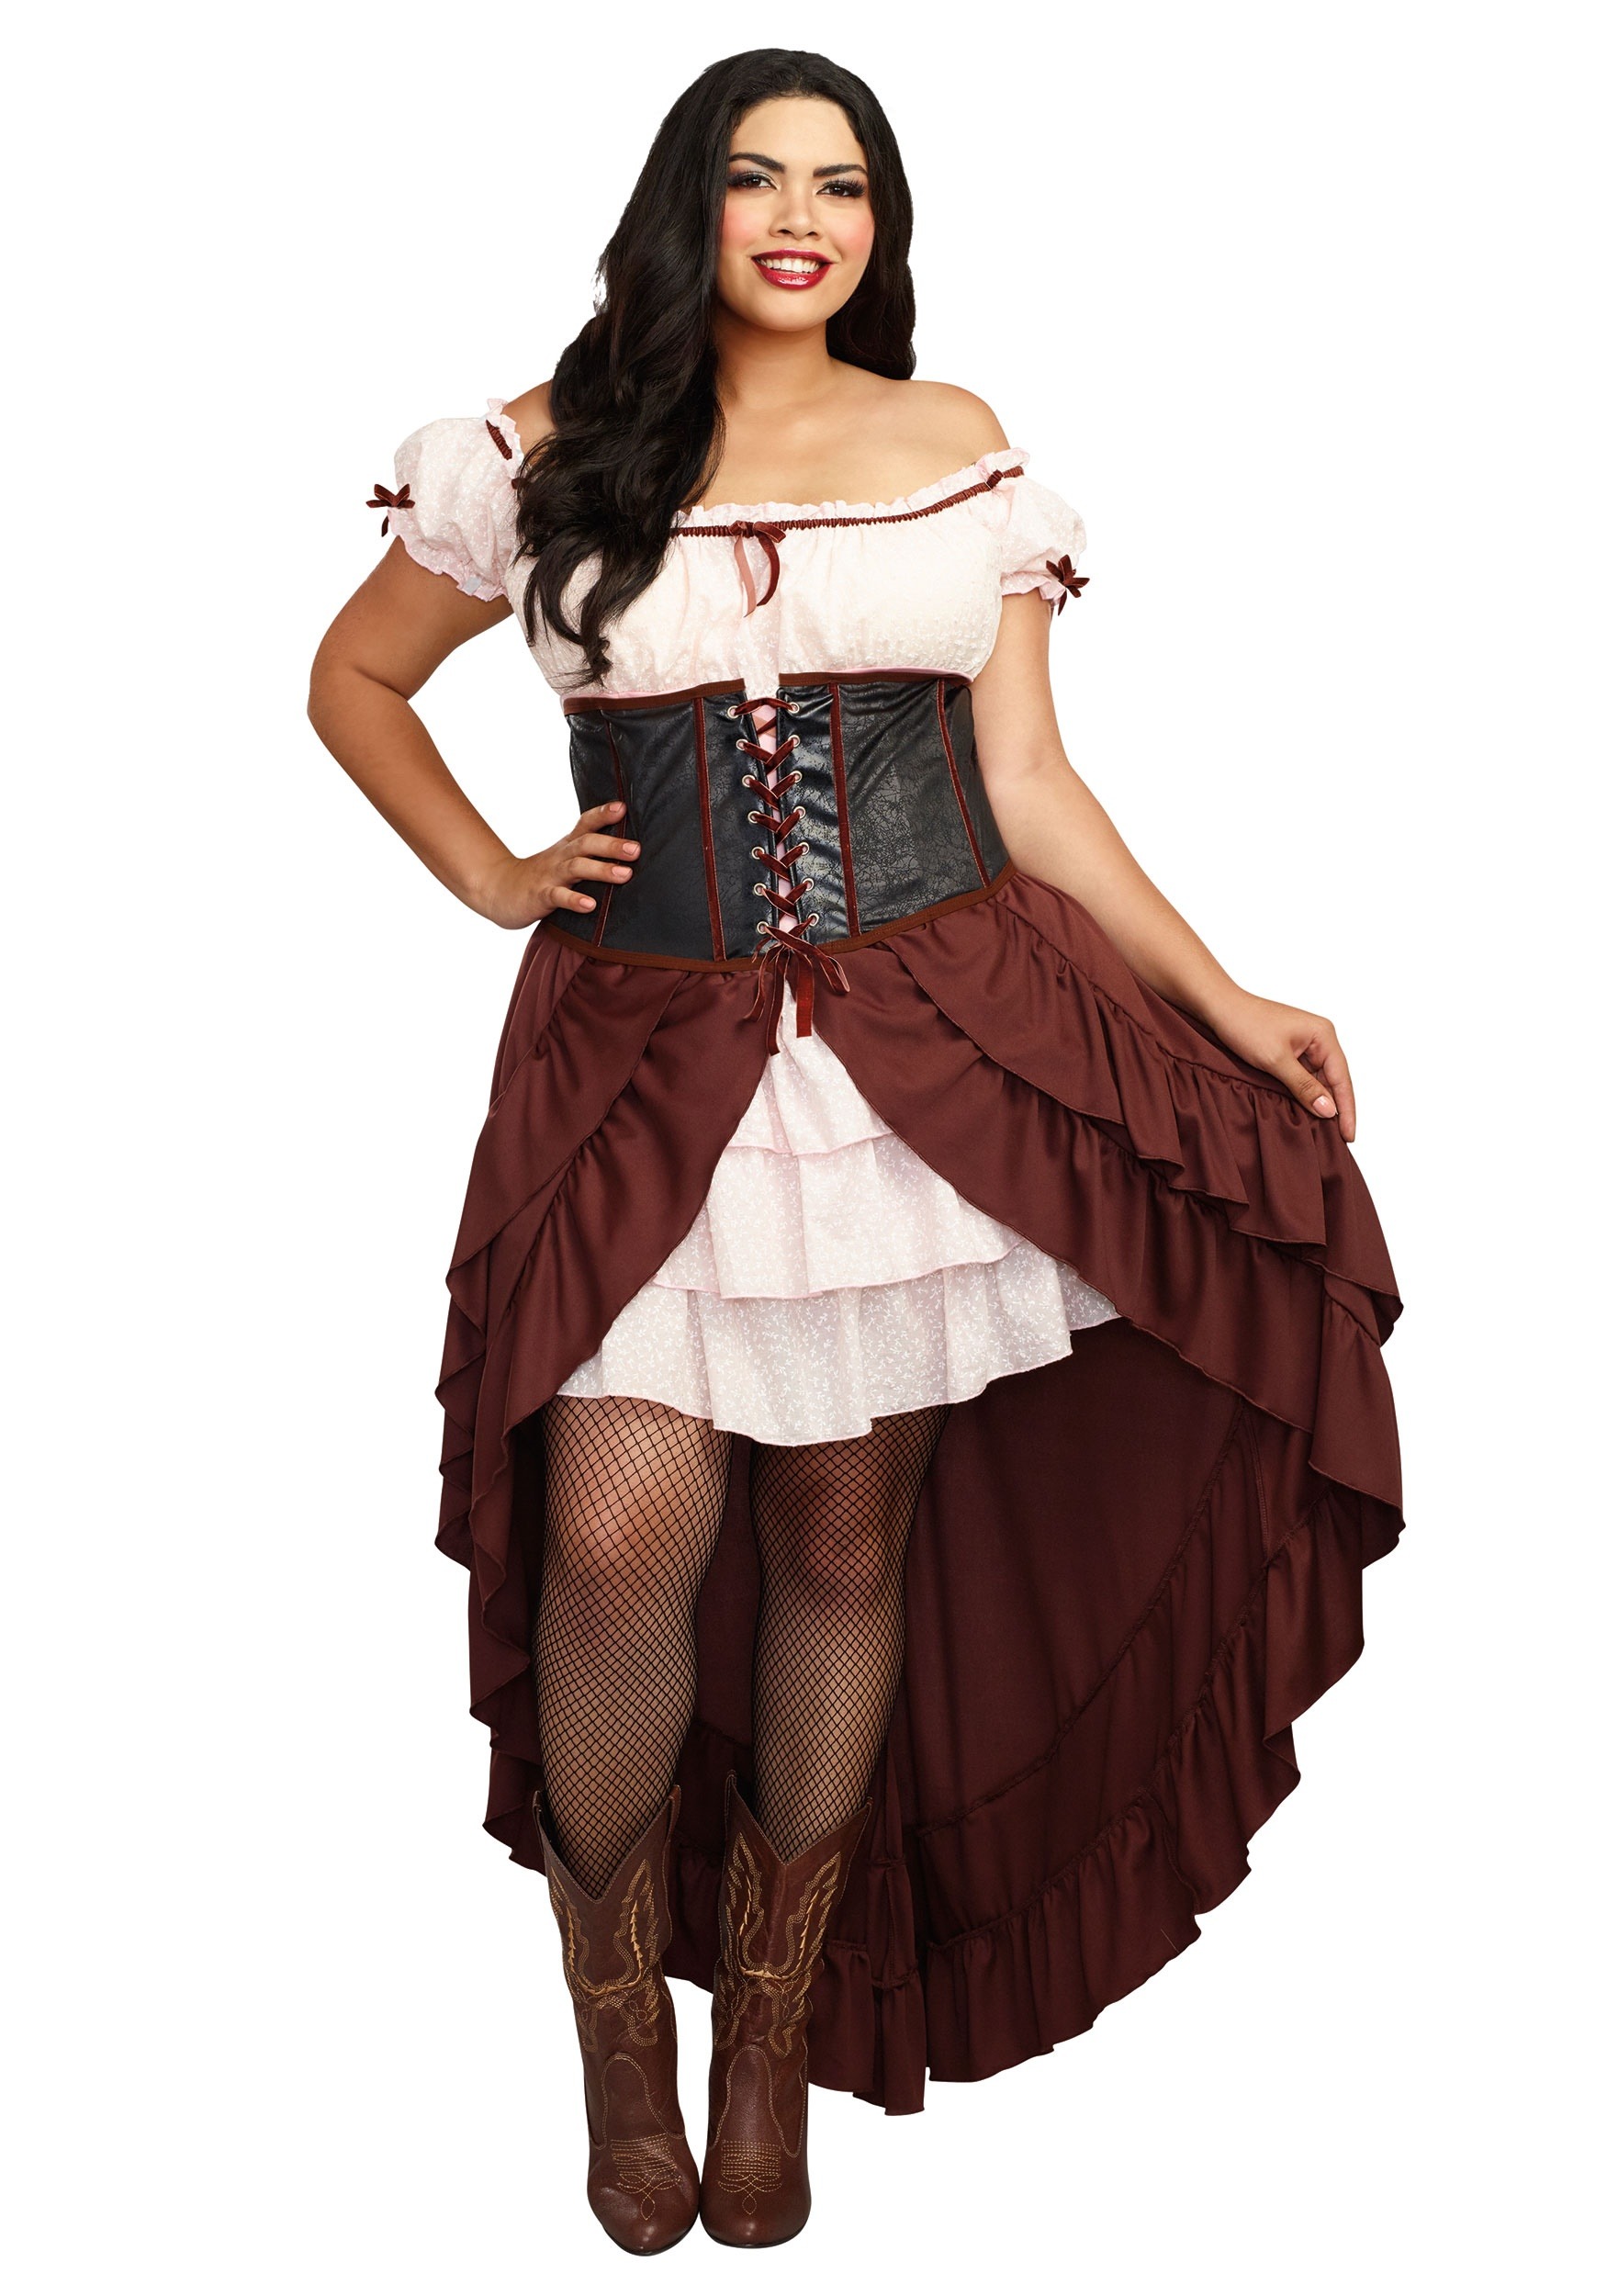 Photos - Fancy Dress Dreamgirl Saloon Girl Plus Size Costume for Women Brown/Pink